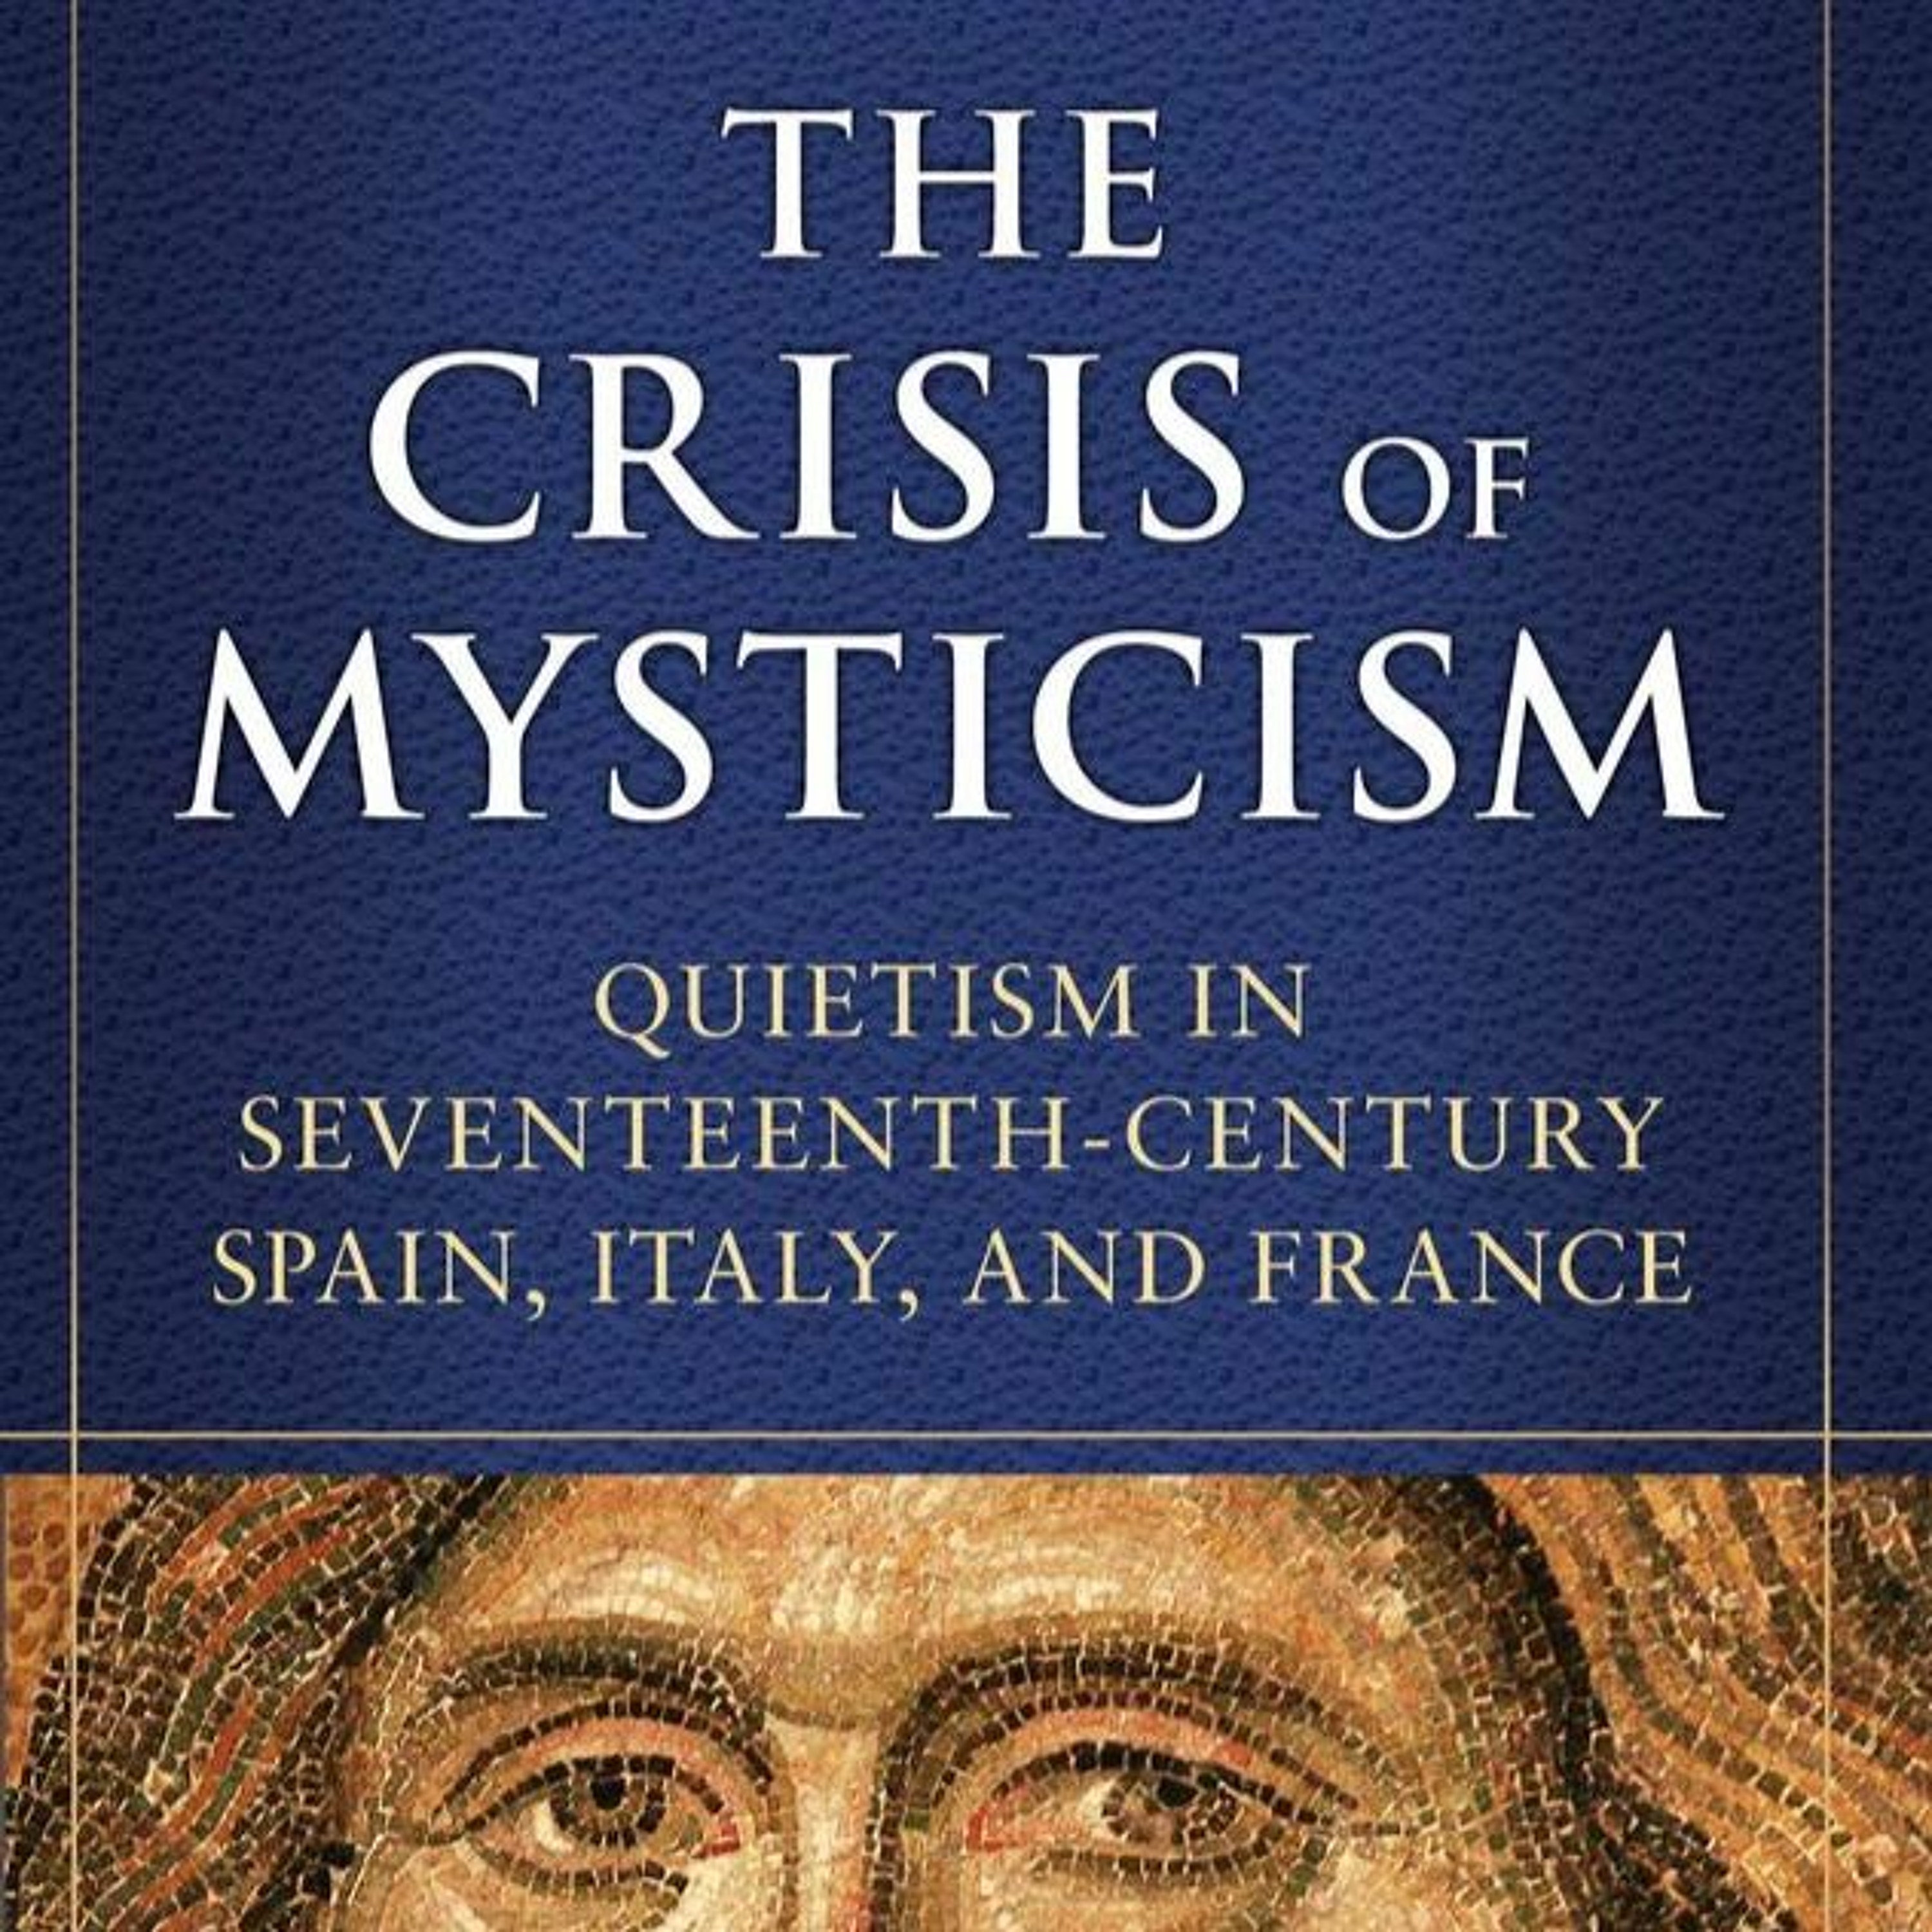 The Crisis of Mysticism: Quietism in 17th Century Spain, Italy, and France